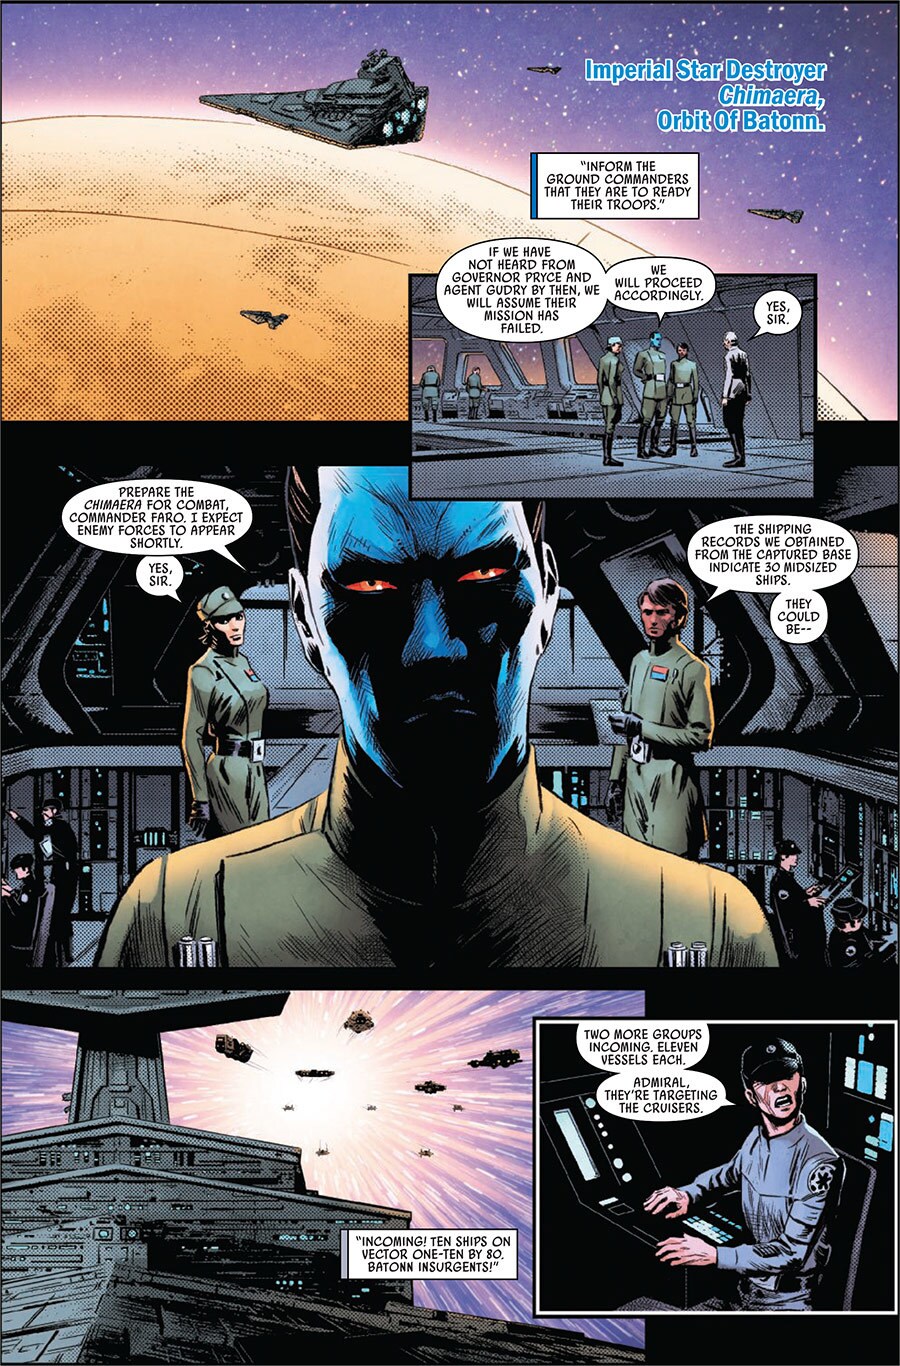 Panels from issue #6 of the Thrawn comic, featuring Thrawn and various officers on the Star Destroyer Chimaera.